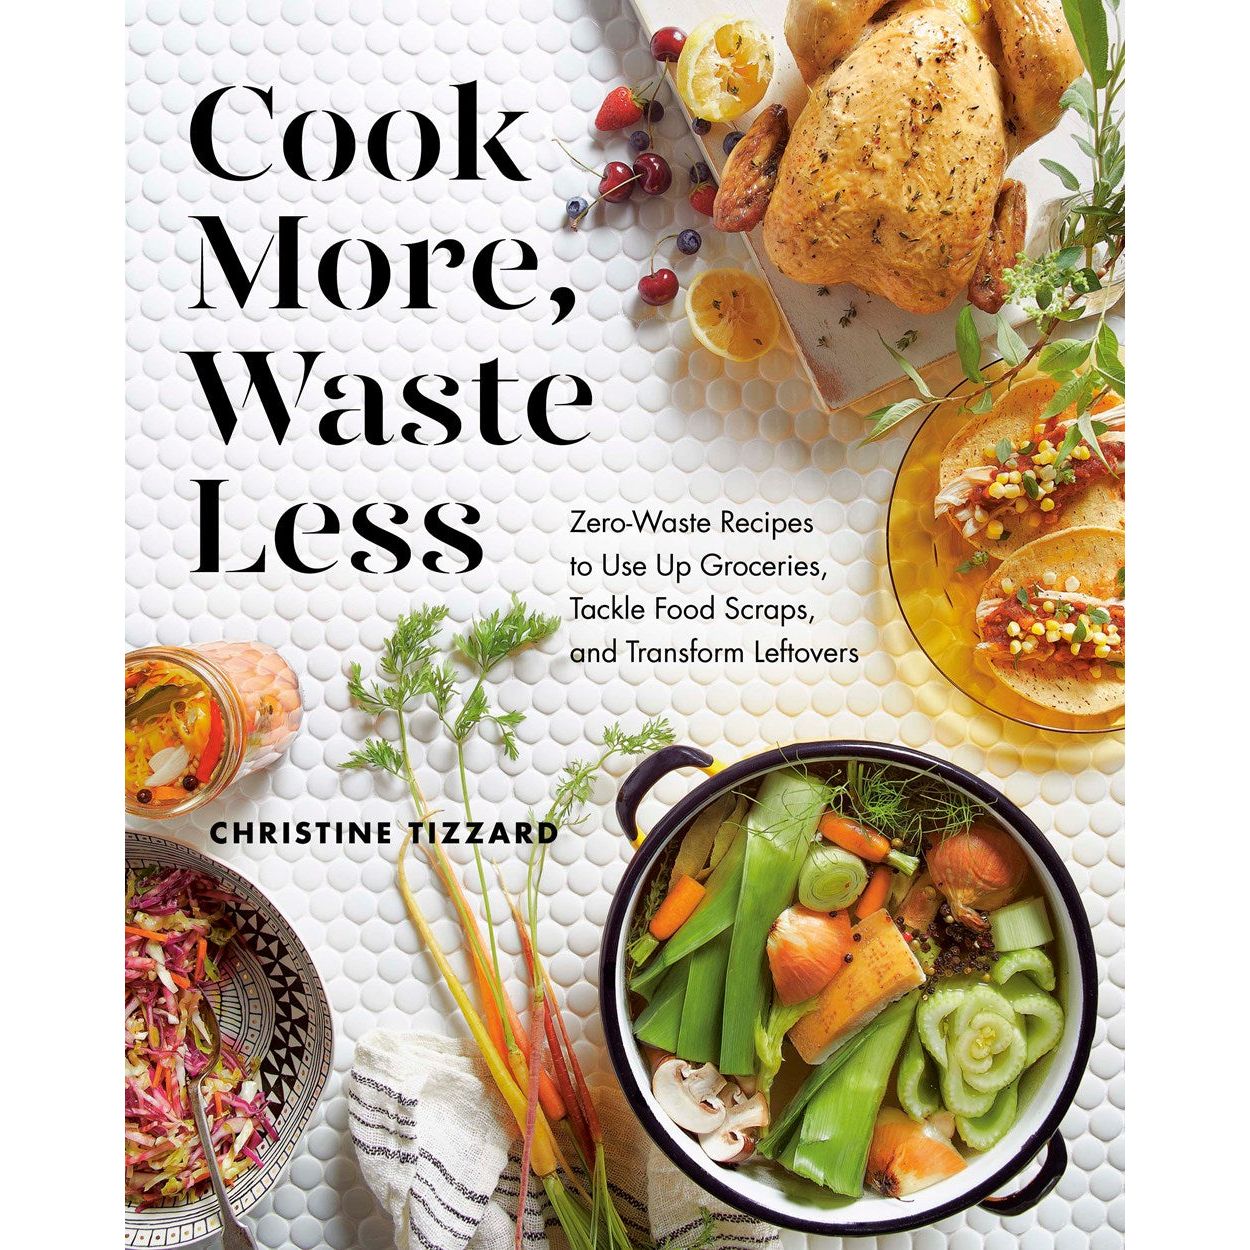 Cook More, Waste Less (Christine Tizzard)